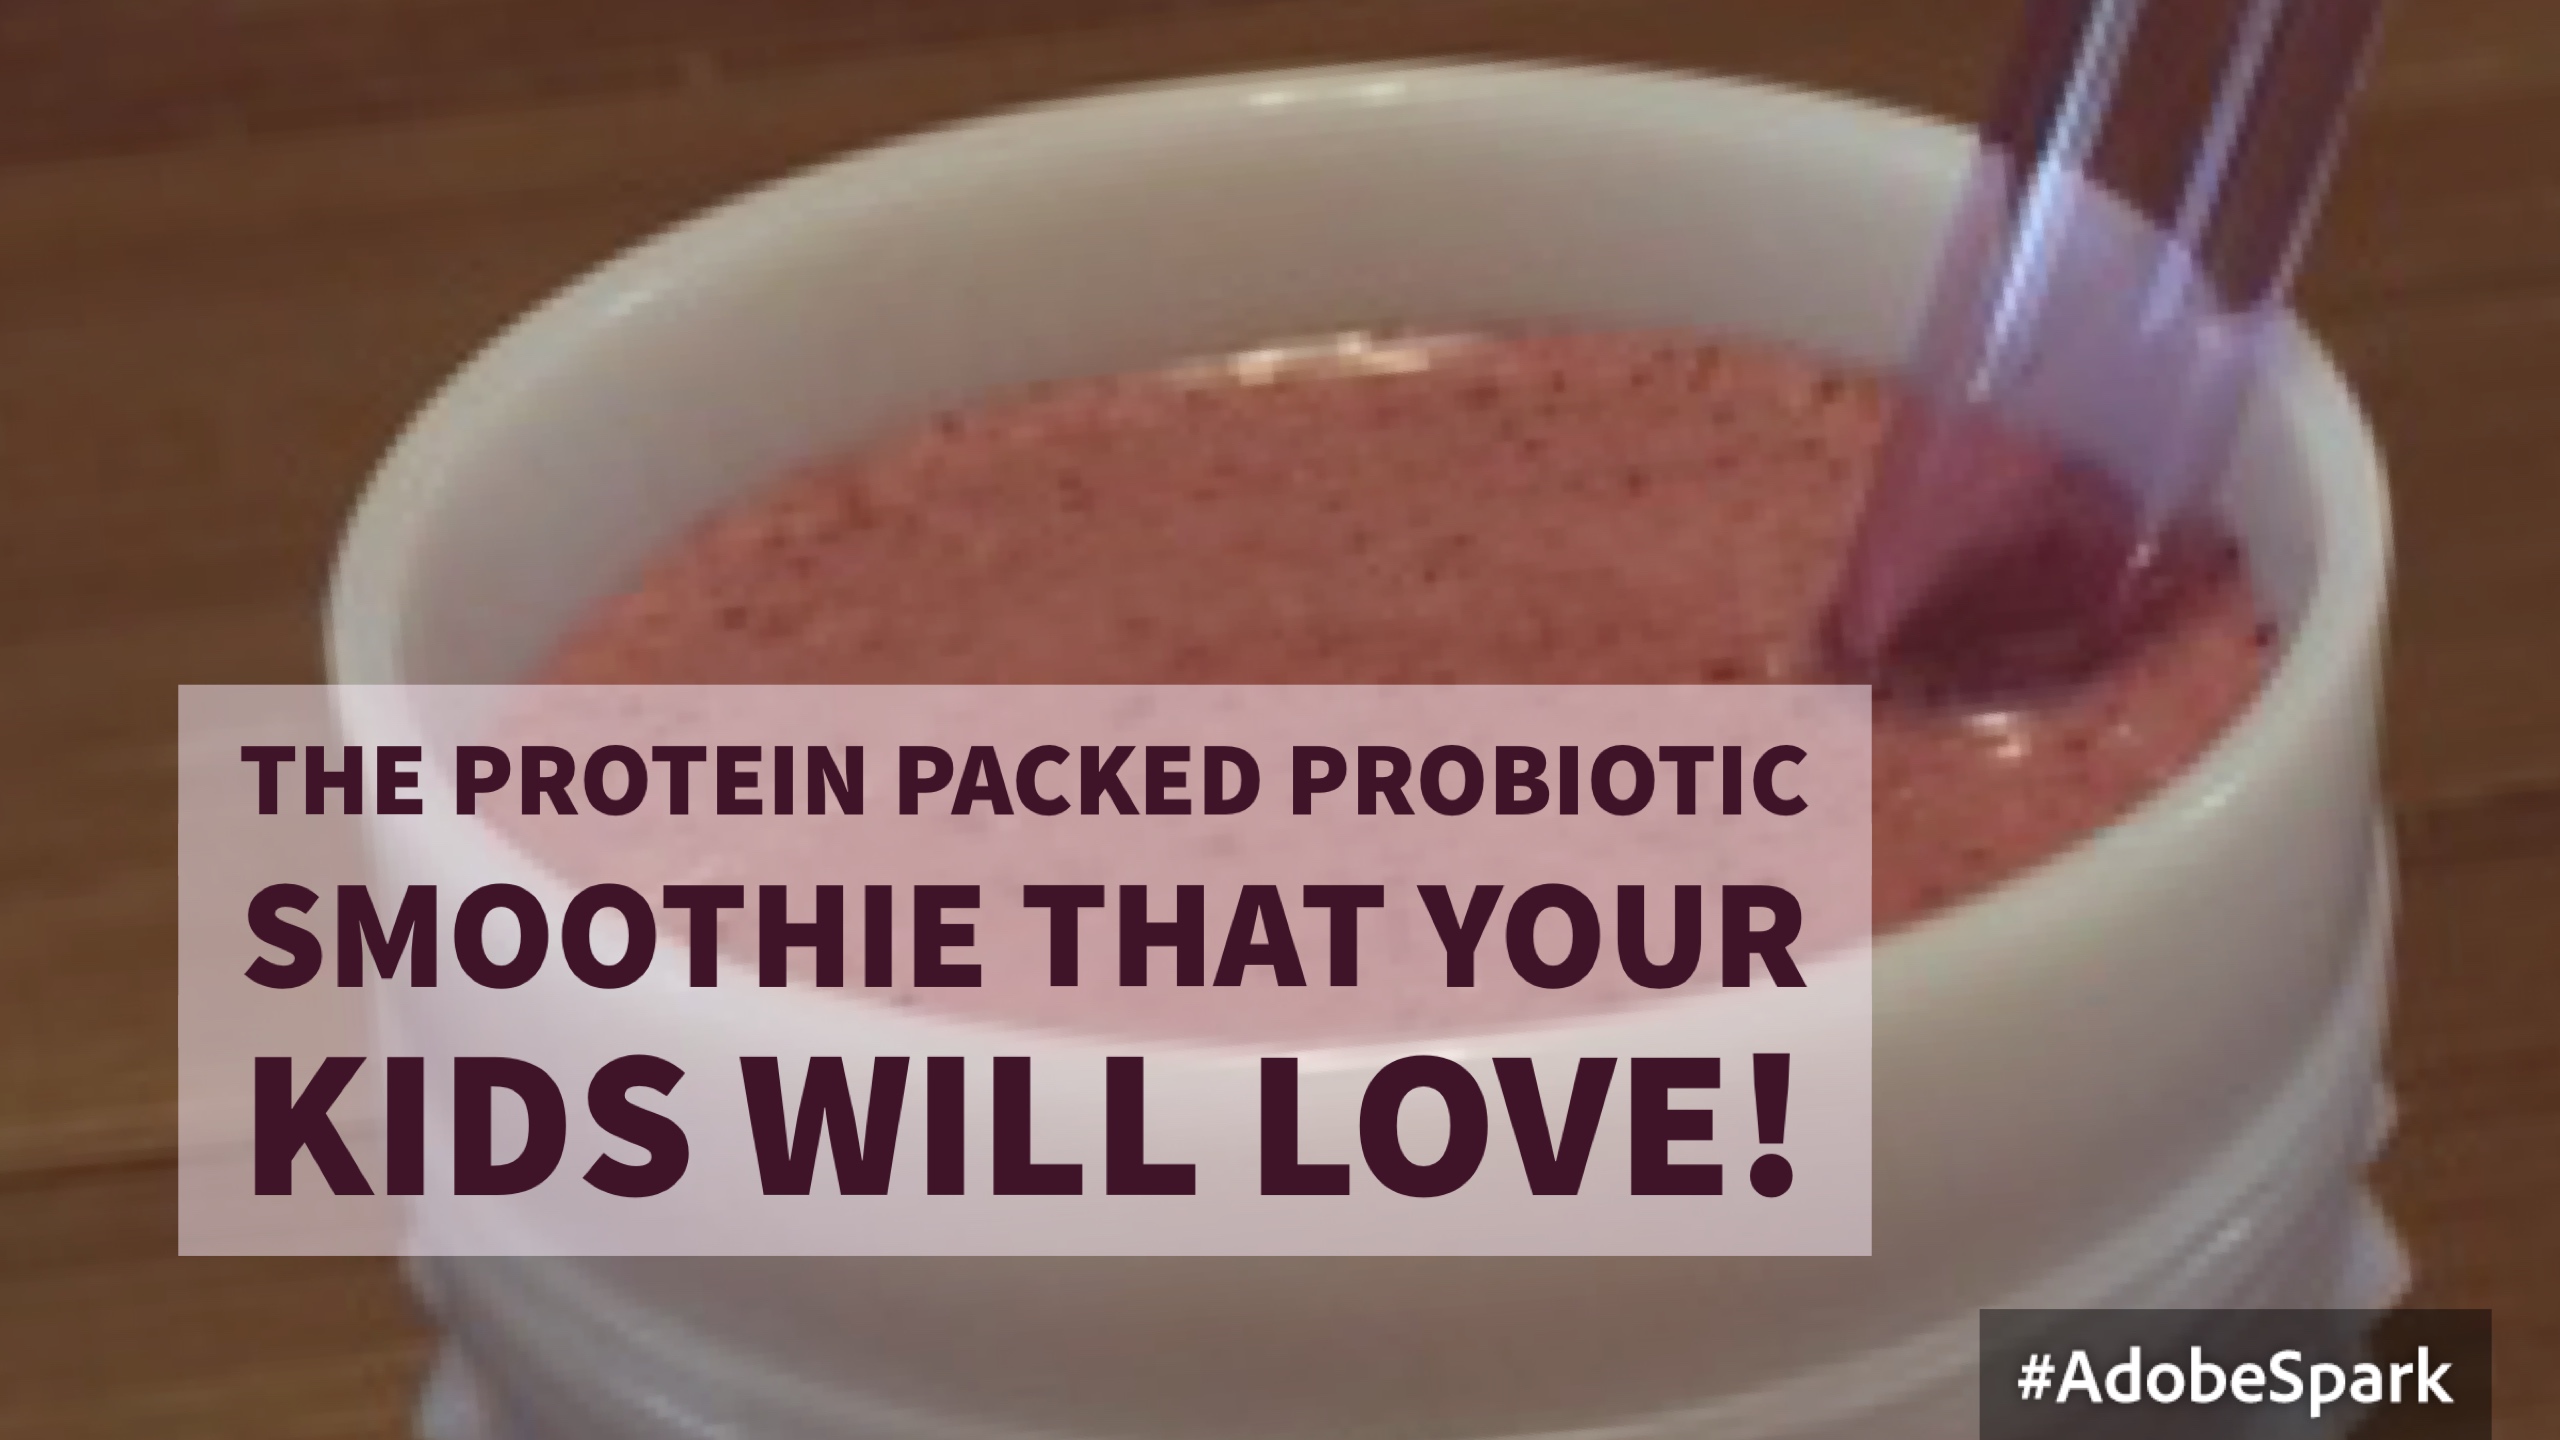 The Protein Packed Probiotic Smoothie That Your Kids Will LOVE!